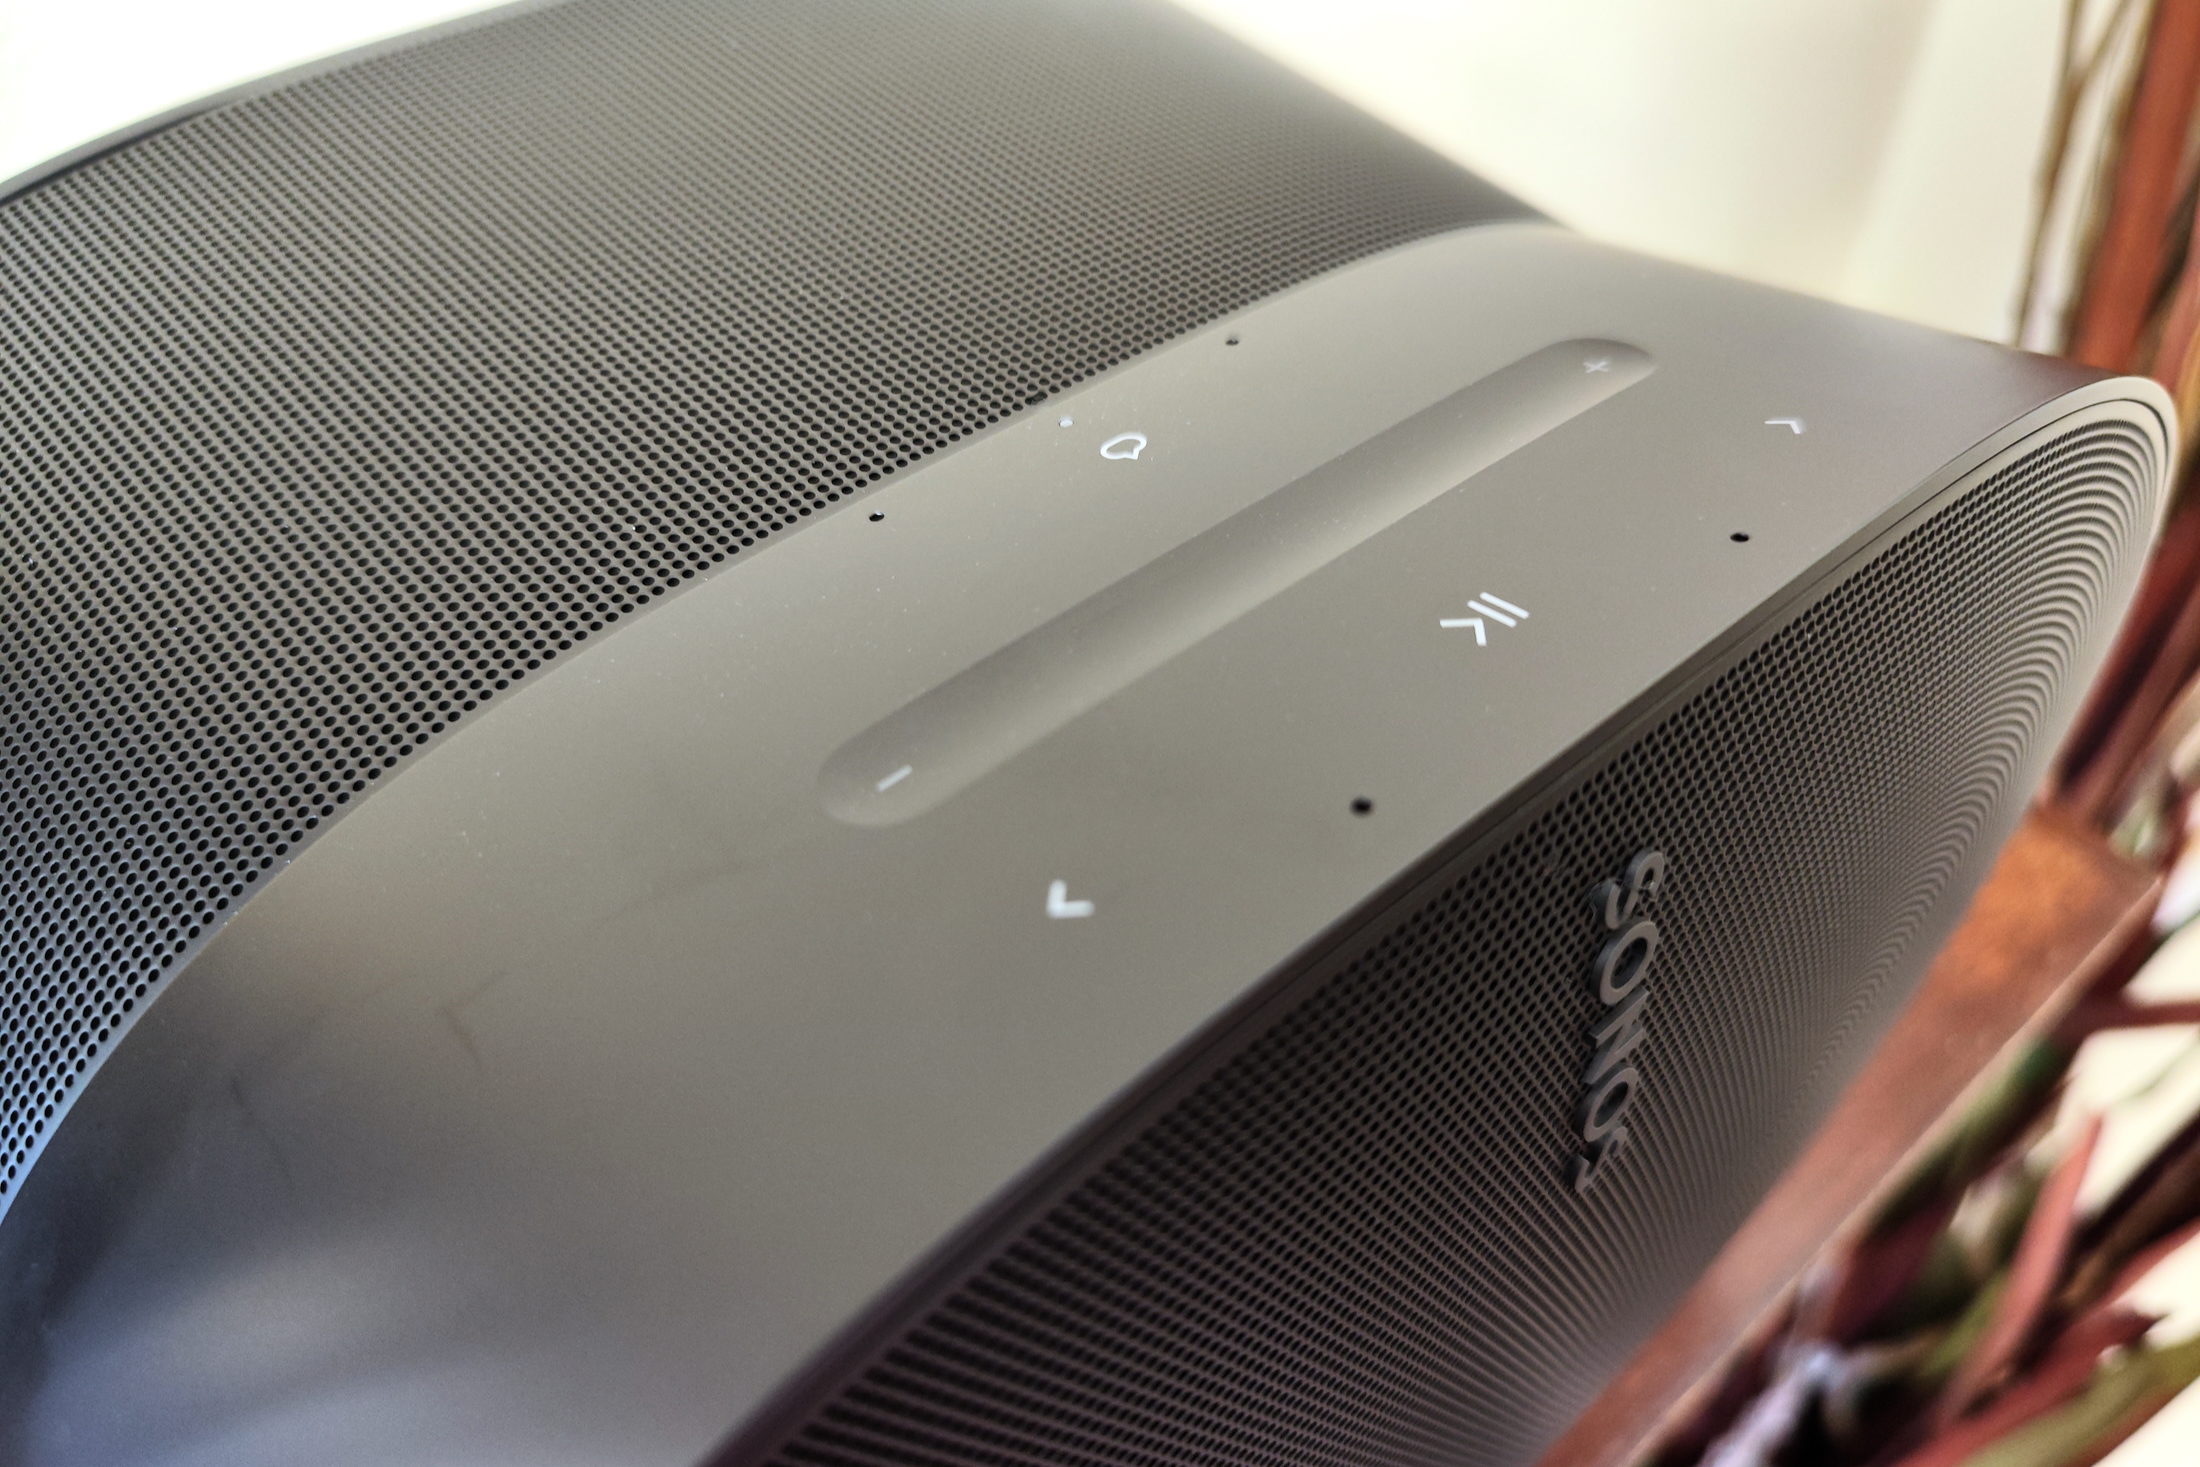 Sonos Era 300 Review: Great, Room-Filling Sound in a Compact Speaker - CNET